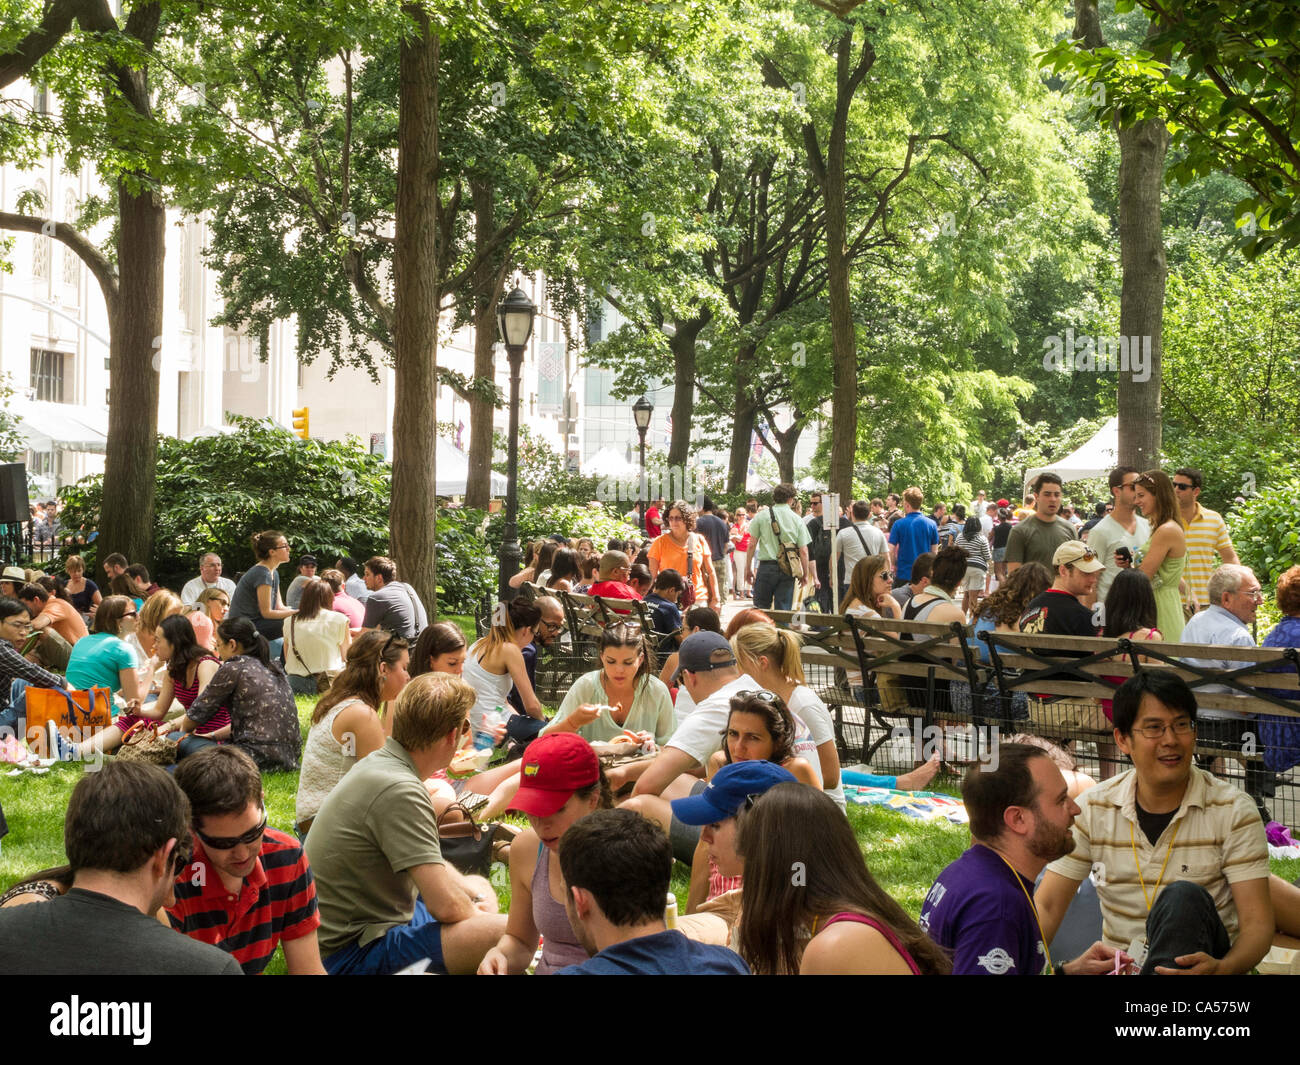 New York, NY – 9 Jun 2012 – Thousands crowd Madison Sq. Park to enjoy freshly cooked food at the 10th Annual Big Apple Barbecue Stock Photo